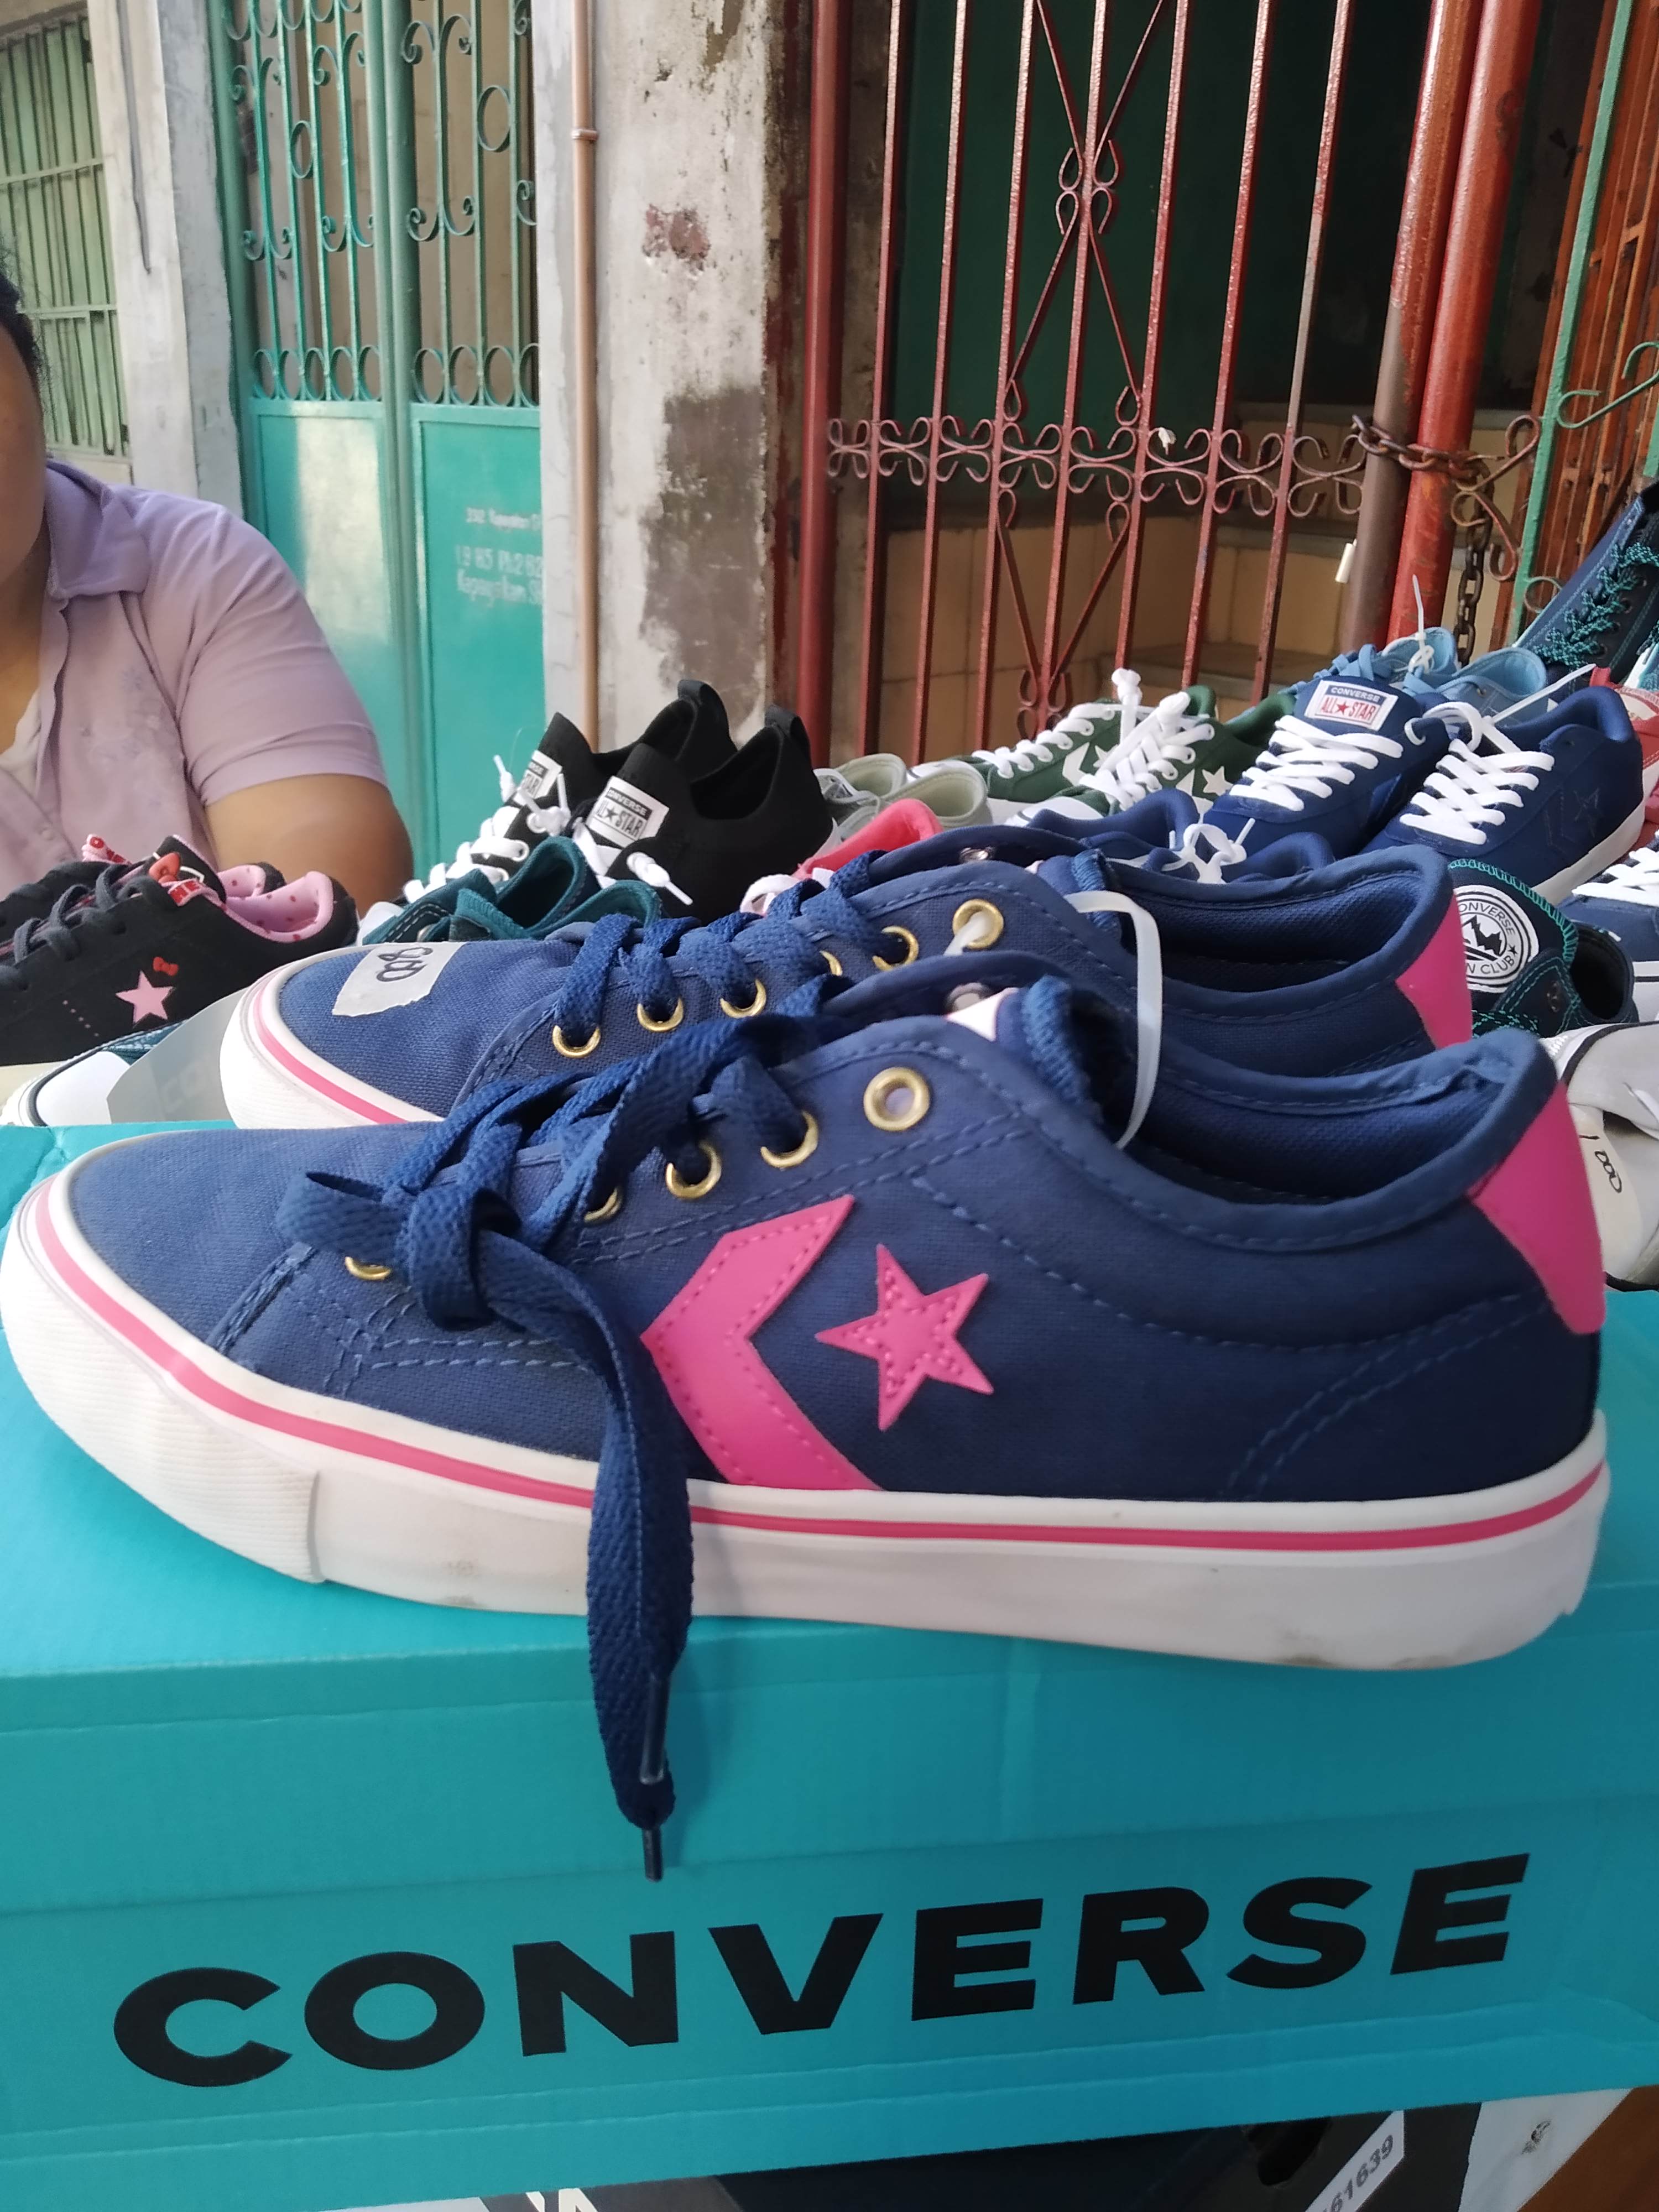 converse skate shoes philippines,Free 